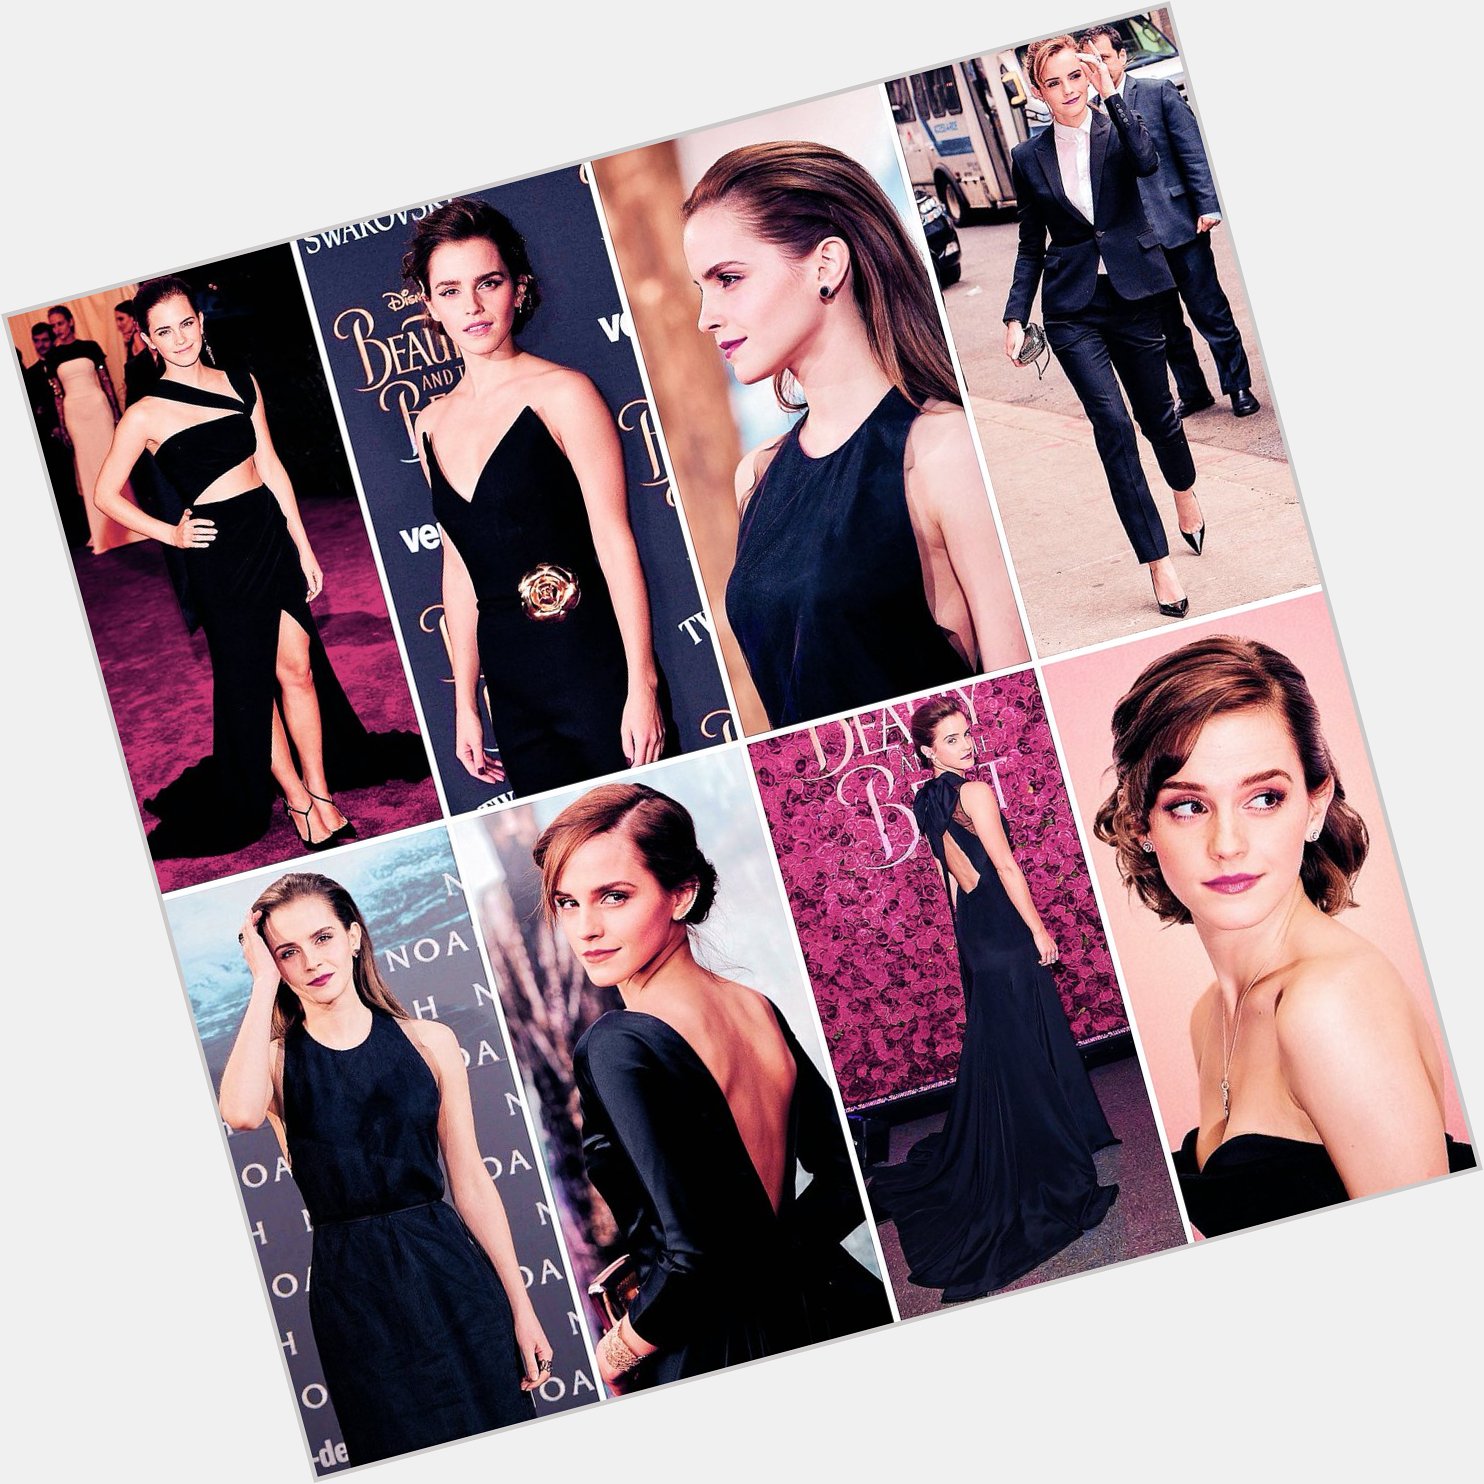 Happy birthday to one of the most timeless beauties & inspiring woman we have today, Emma Watson   